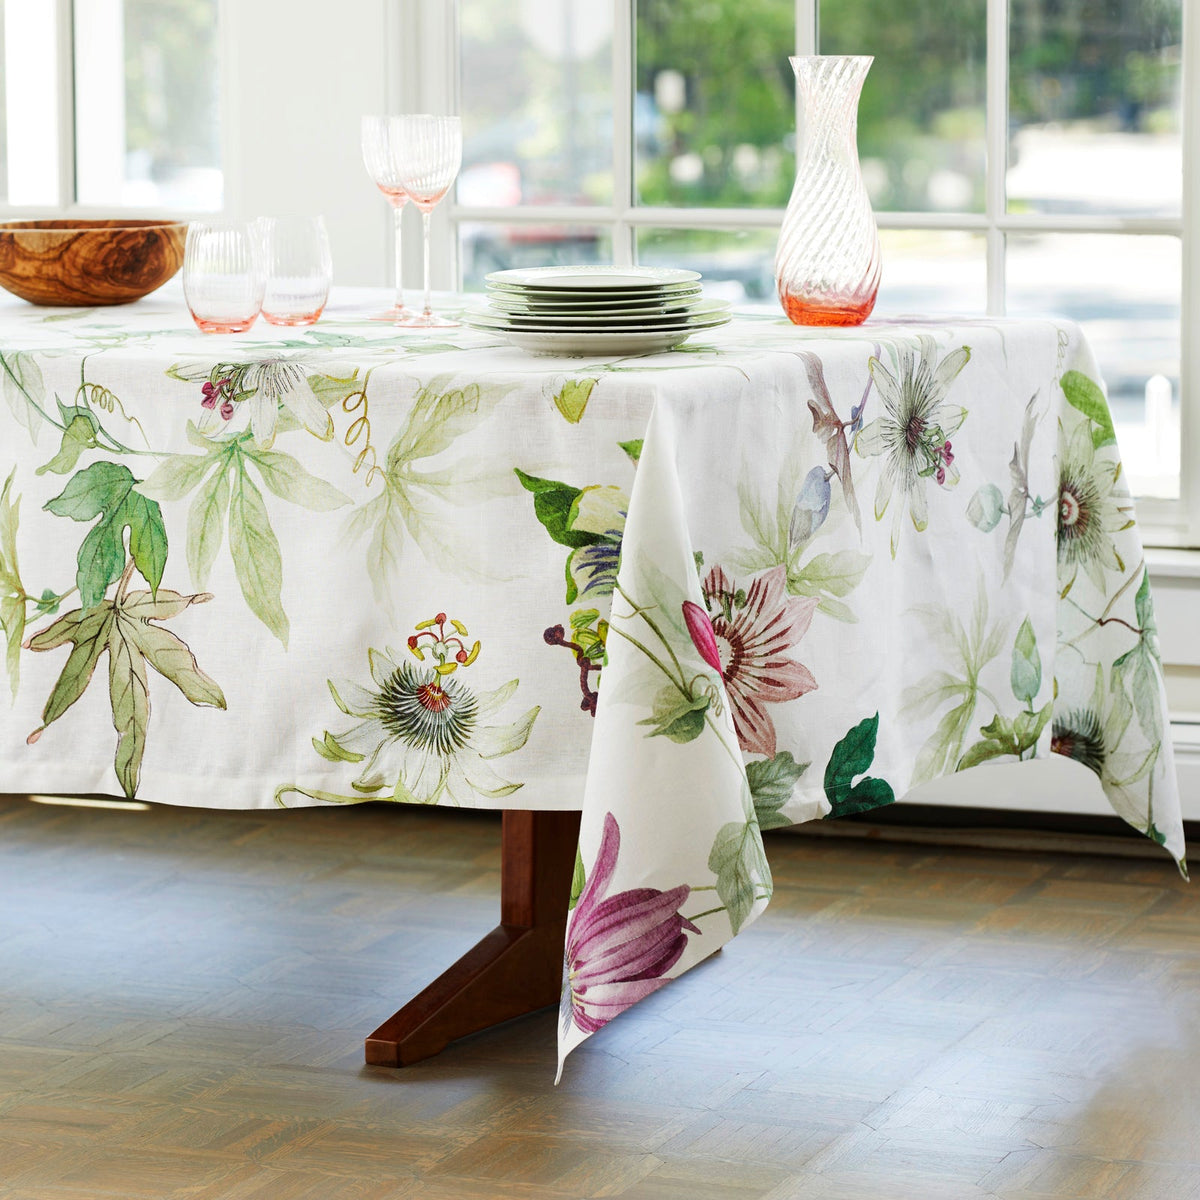 A Passionflower Linen Tablecloth adorned with TTT.